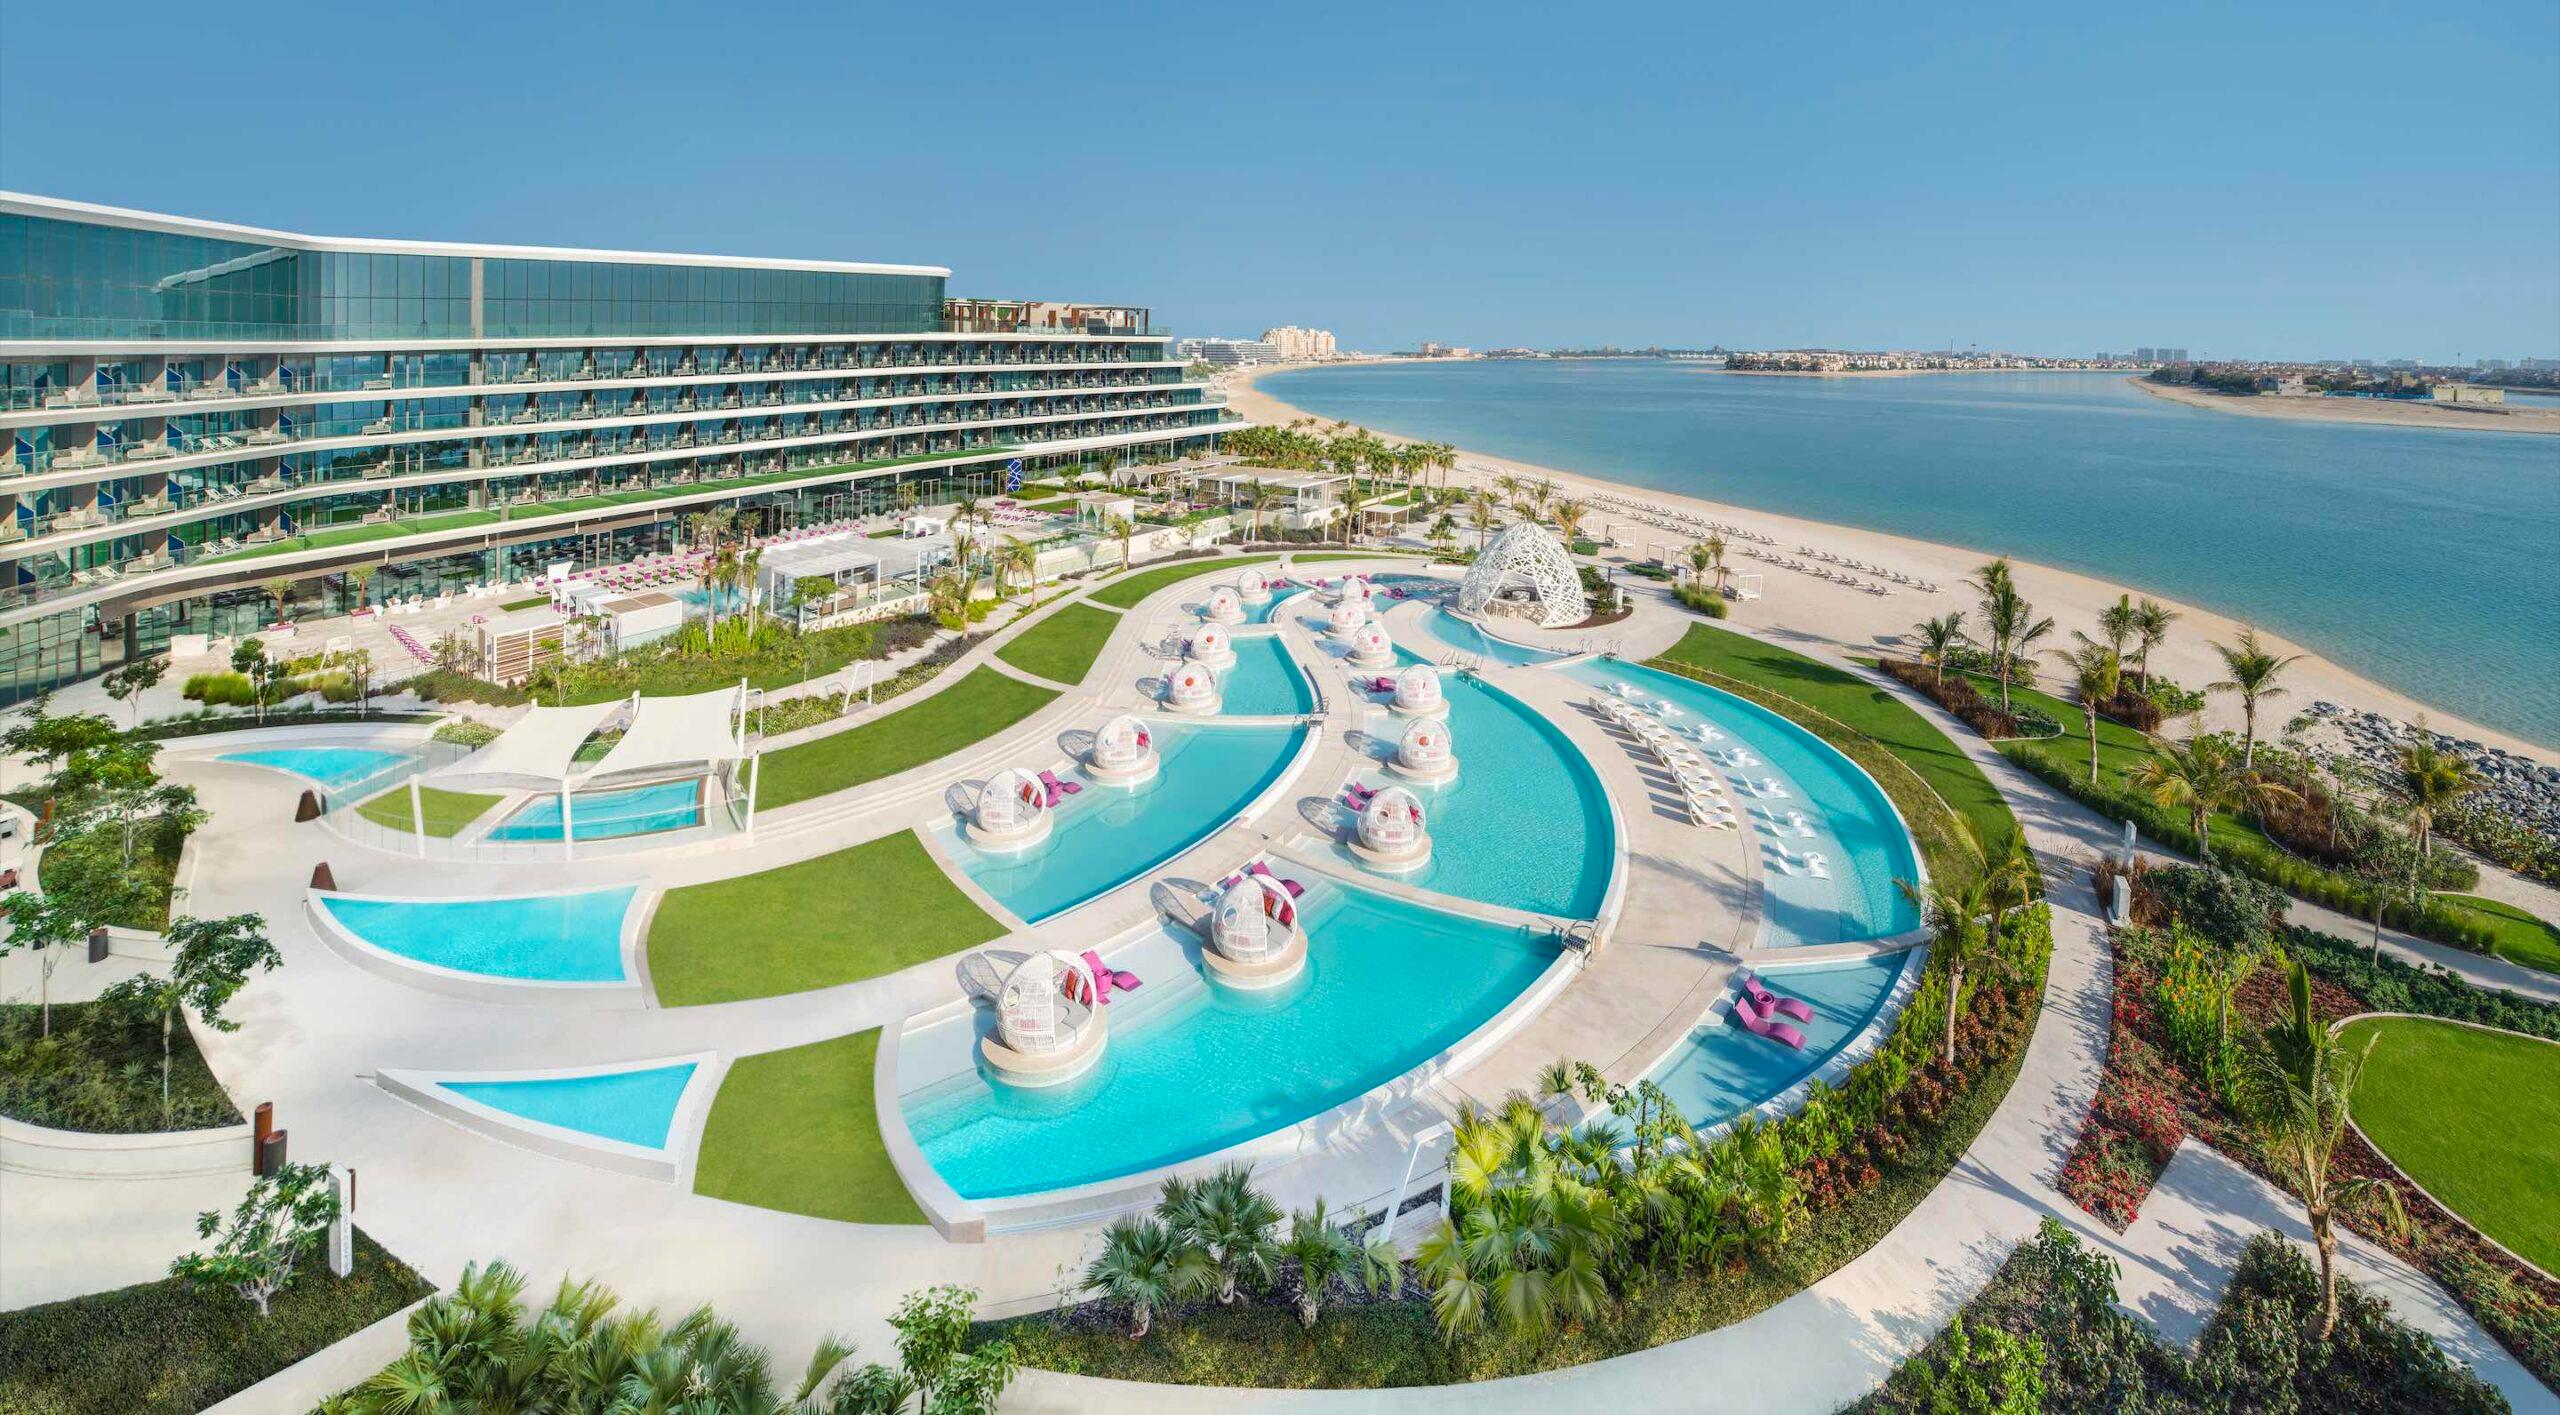 Whether you're looking for a staycation or daycation, W Dubai - The Palm have you covered